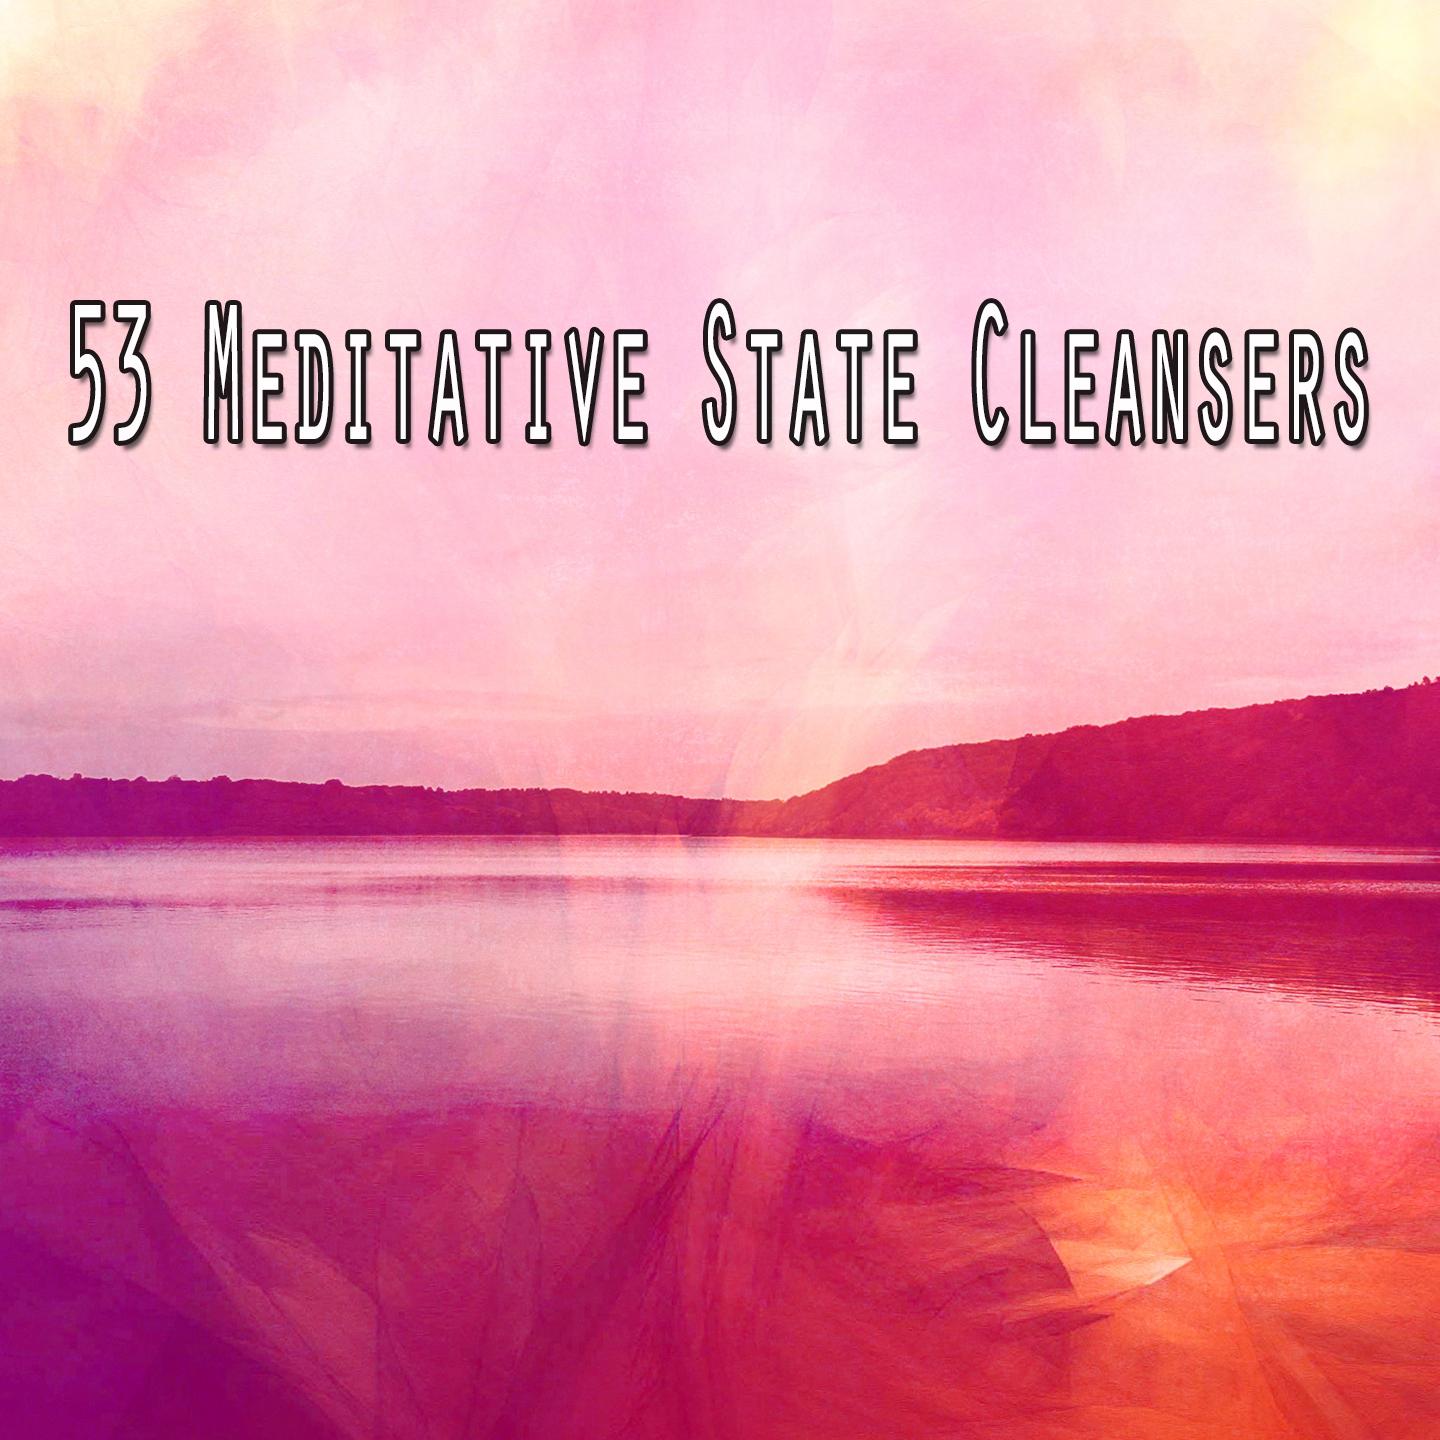 53 Meditative State Cleansers